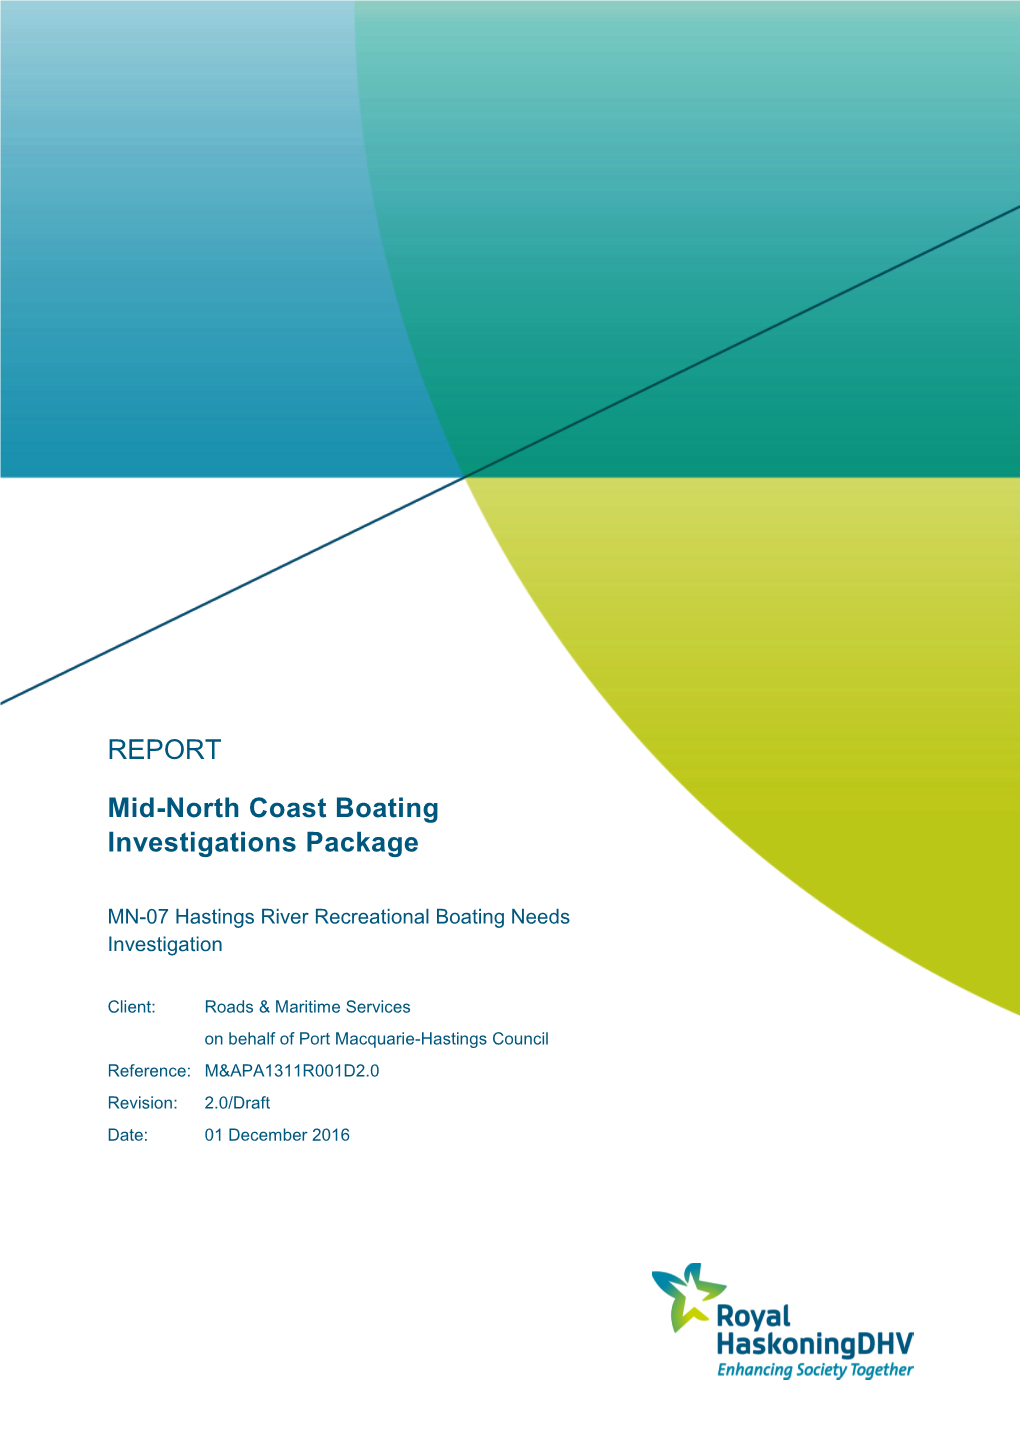 REPORT Mid-North Coast Boating Investigations Package